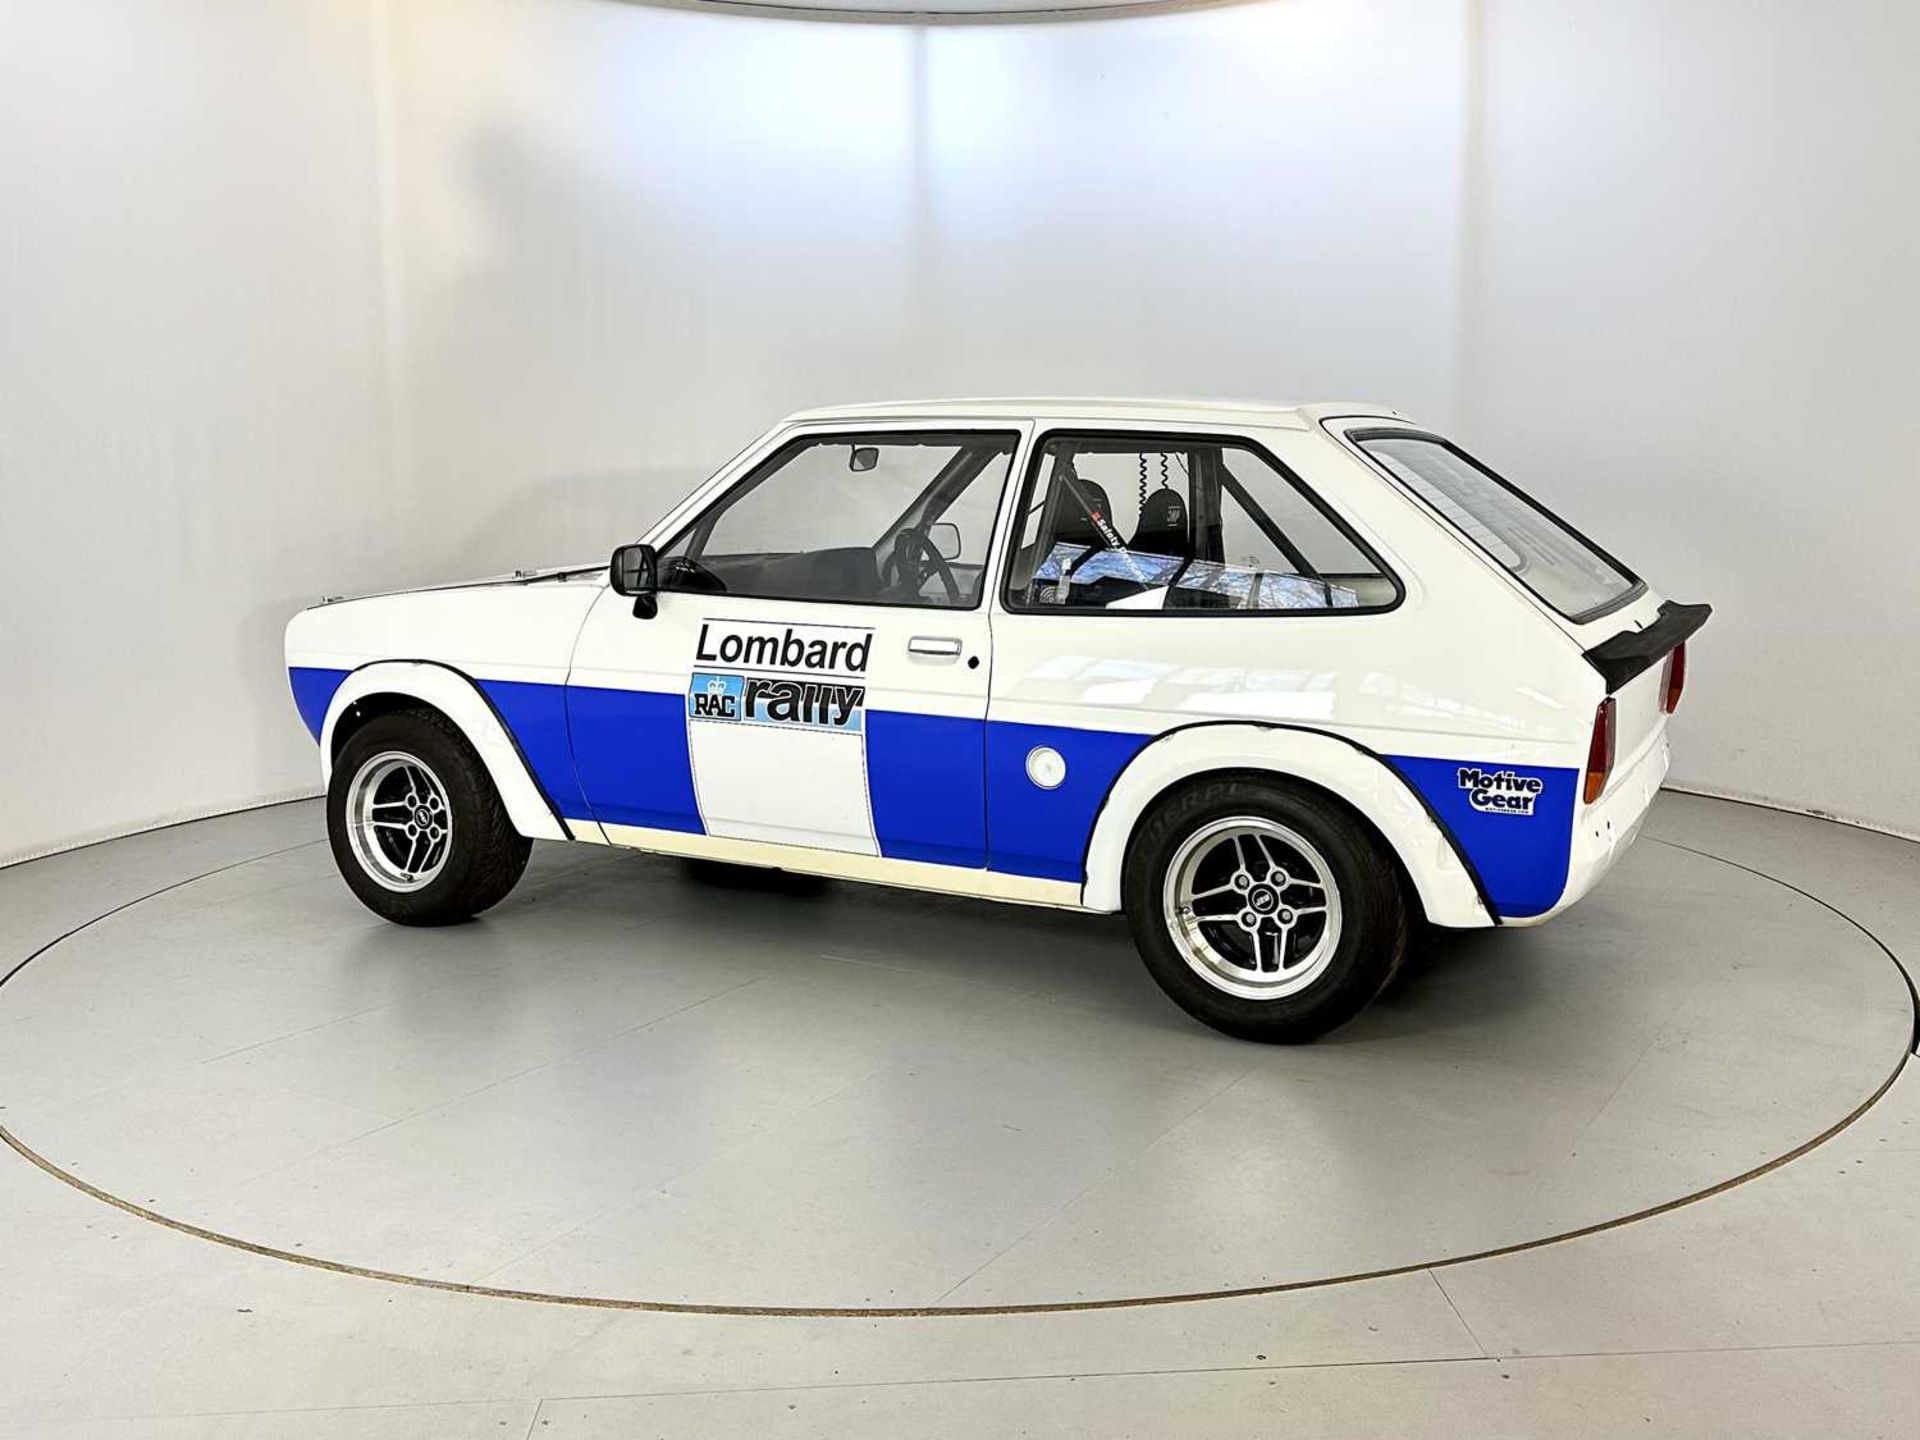 1983 Ford Fiesta XR2 - Image 6 of 28